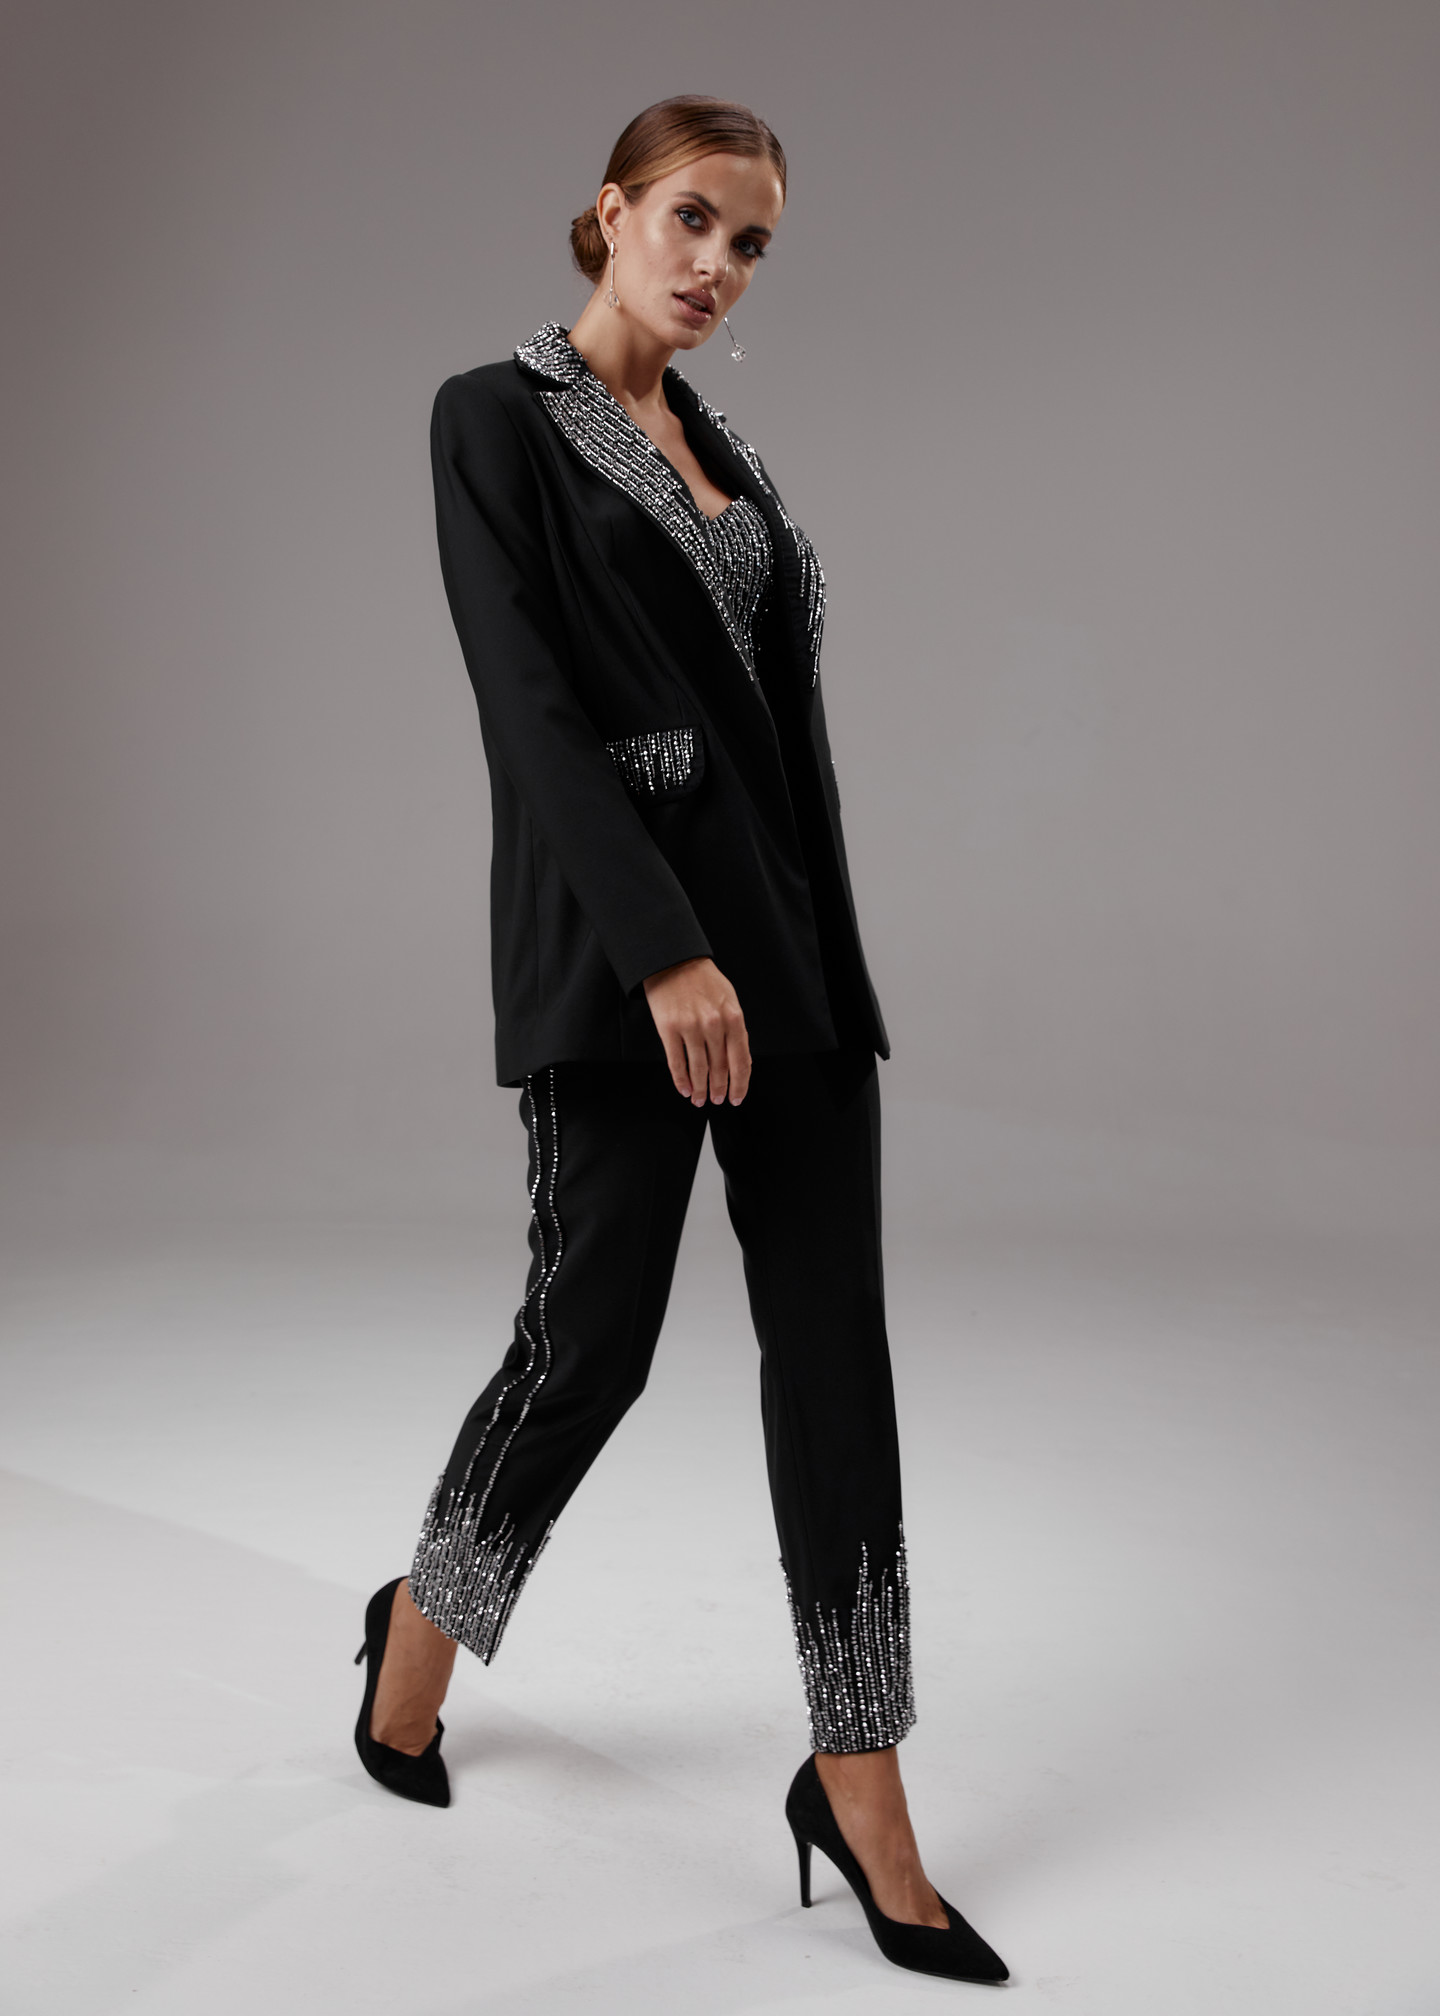 Beaded trousers, 2023, couture, trousers, evening, black, black suit beaded with silver, embroidery, silver color